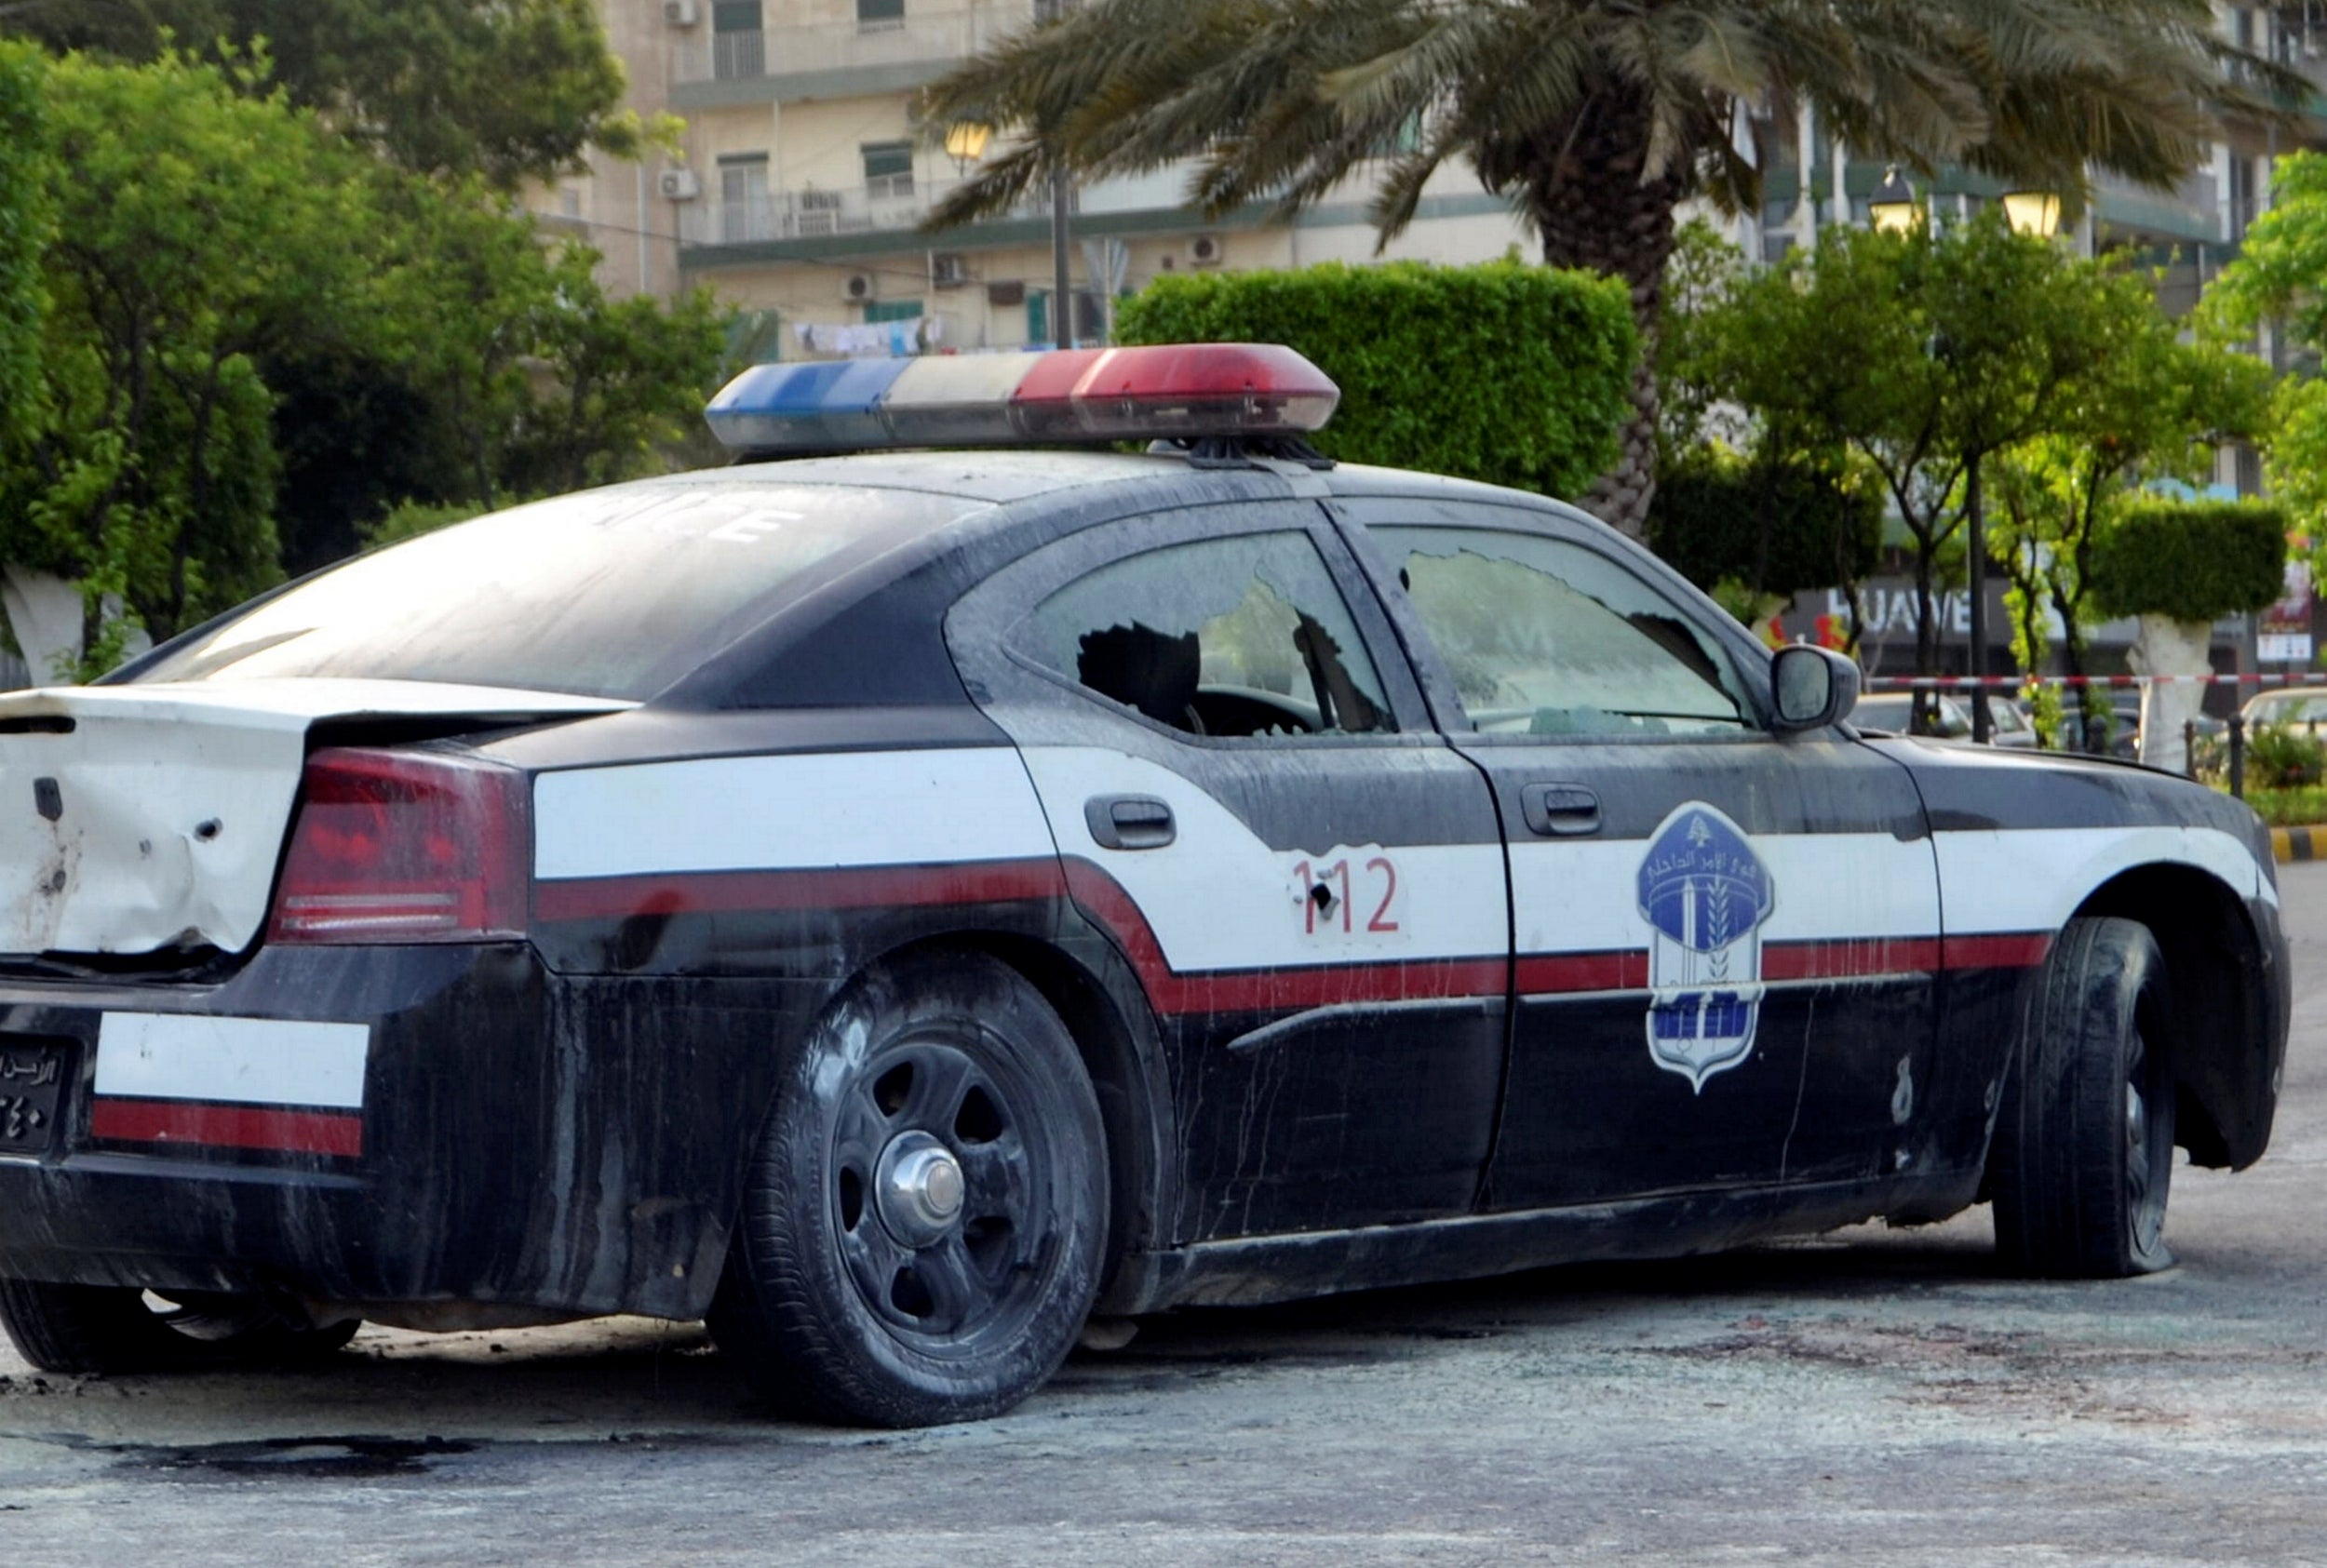 A damaged police car is seen at the scene where a militant attacked a security forces patrol on Monday, in Lebanon's northern city of Tripoli, Lebanon June 4, 2019